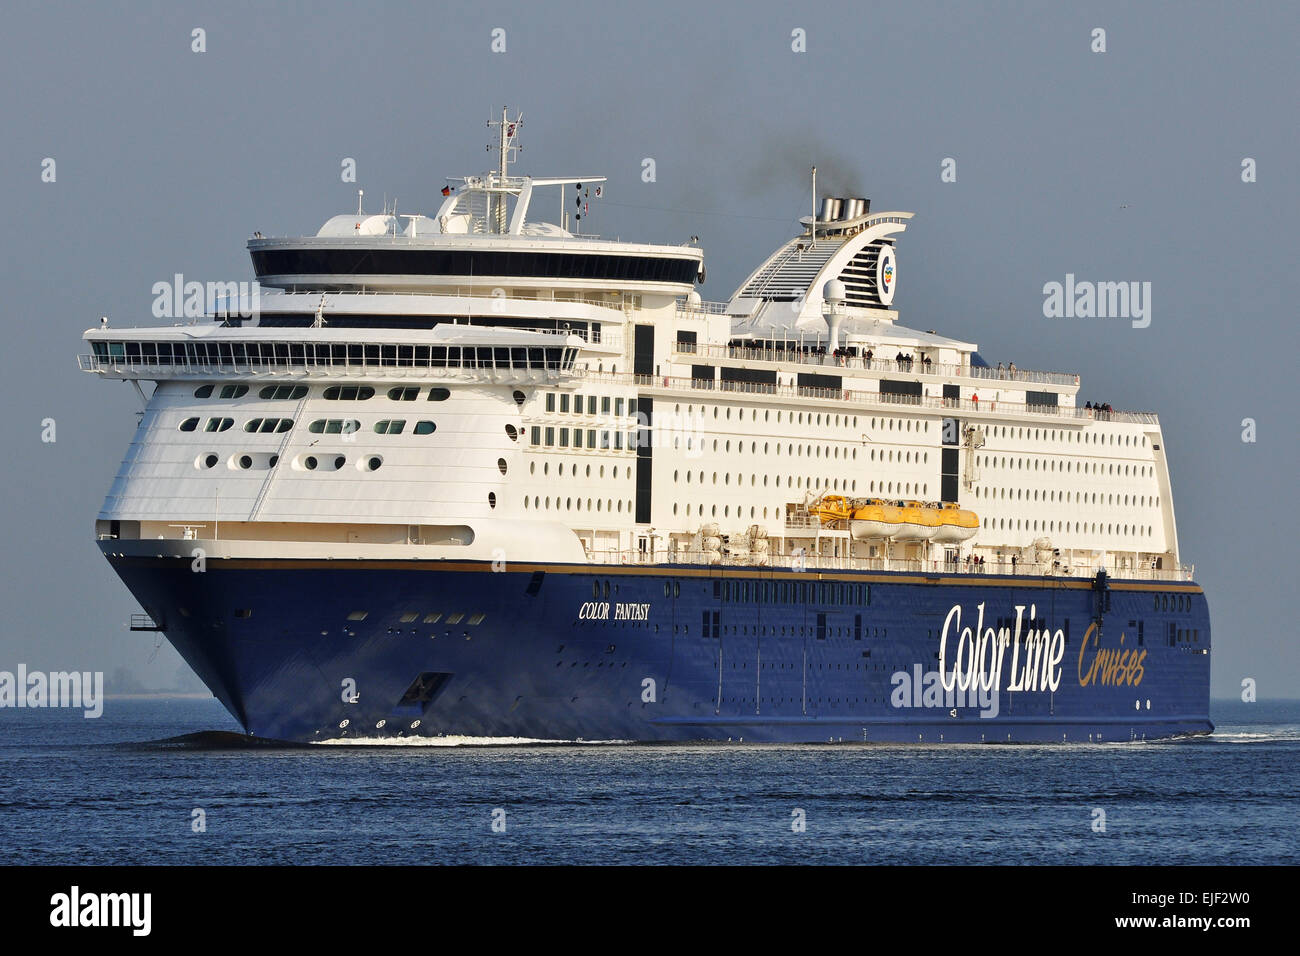 Shopping mall cruise ship MS Color Fantasy, Color Line shipping company,  Oslo, Norway Stock Photo - Alamy